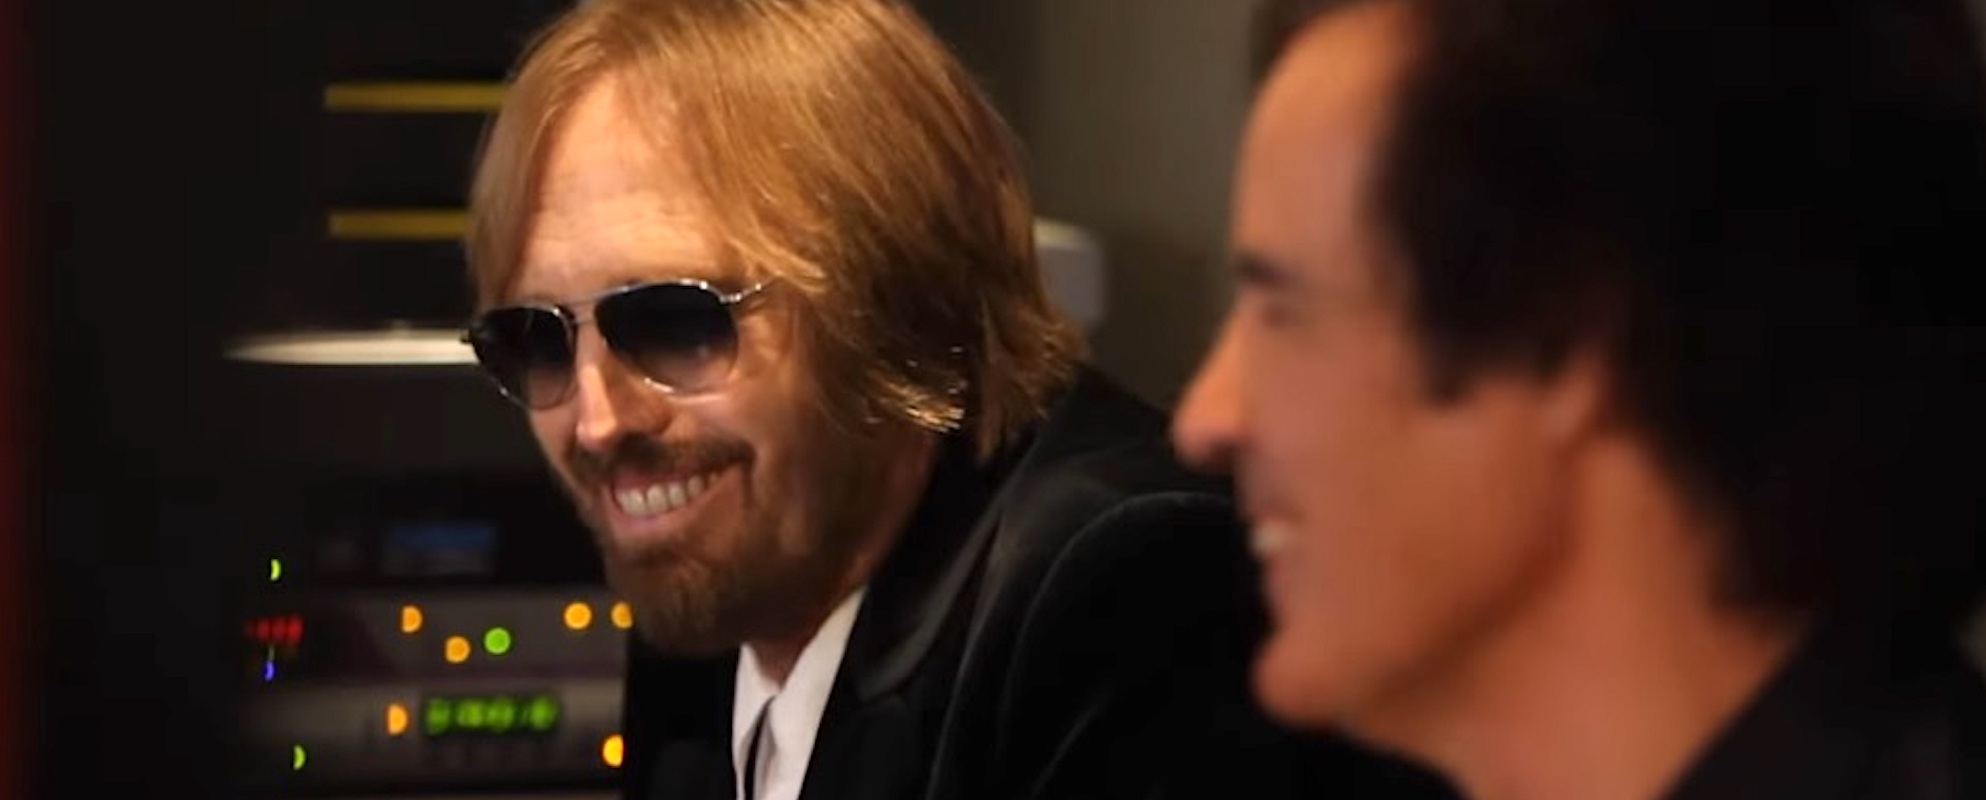 Watch: Unearthed Footage of Tom Petty and the Heartbreakers Covering “Help Me” During ‘Mojo’ Sessions